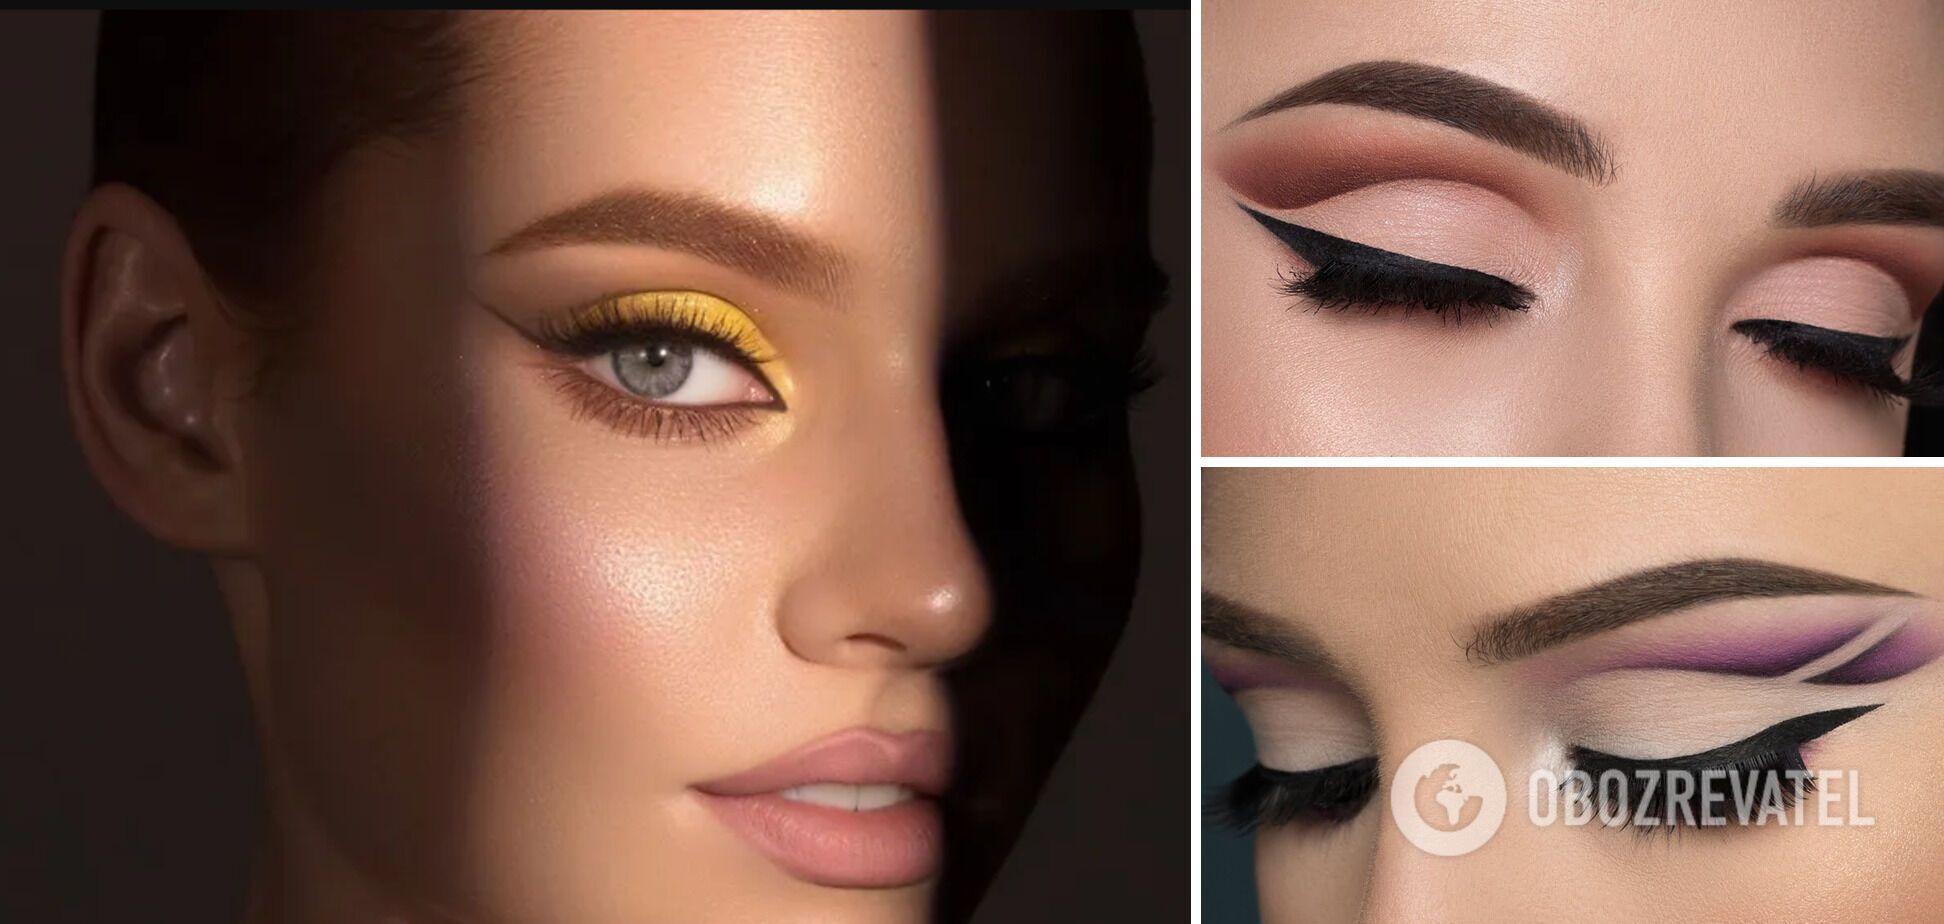 Your eyes will be 10 times brighter: an effective life hack for eye makeup